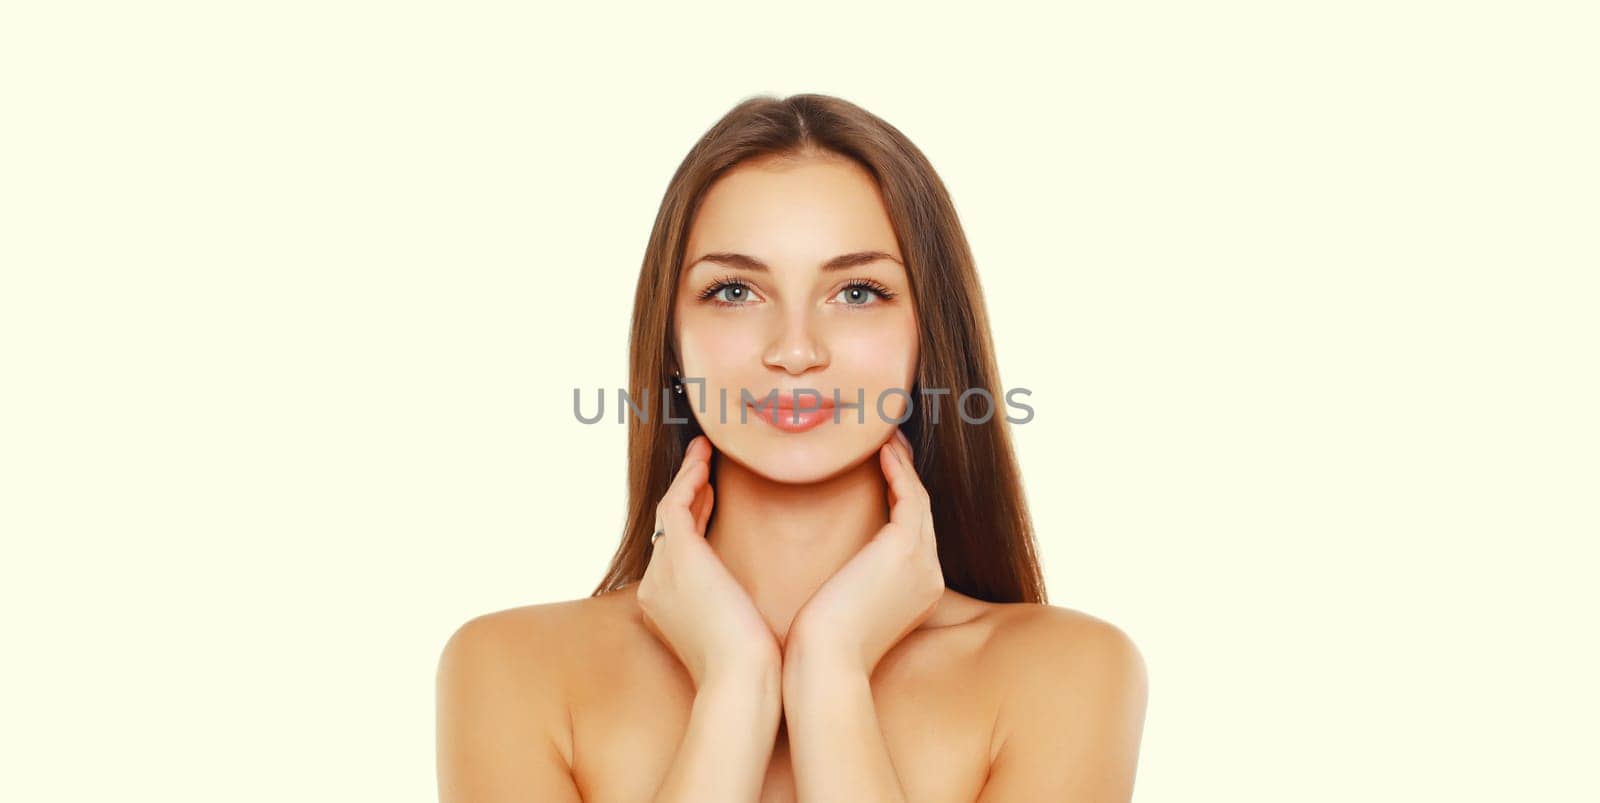 Beauty portrait of brunette smiling young woman on white studio background